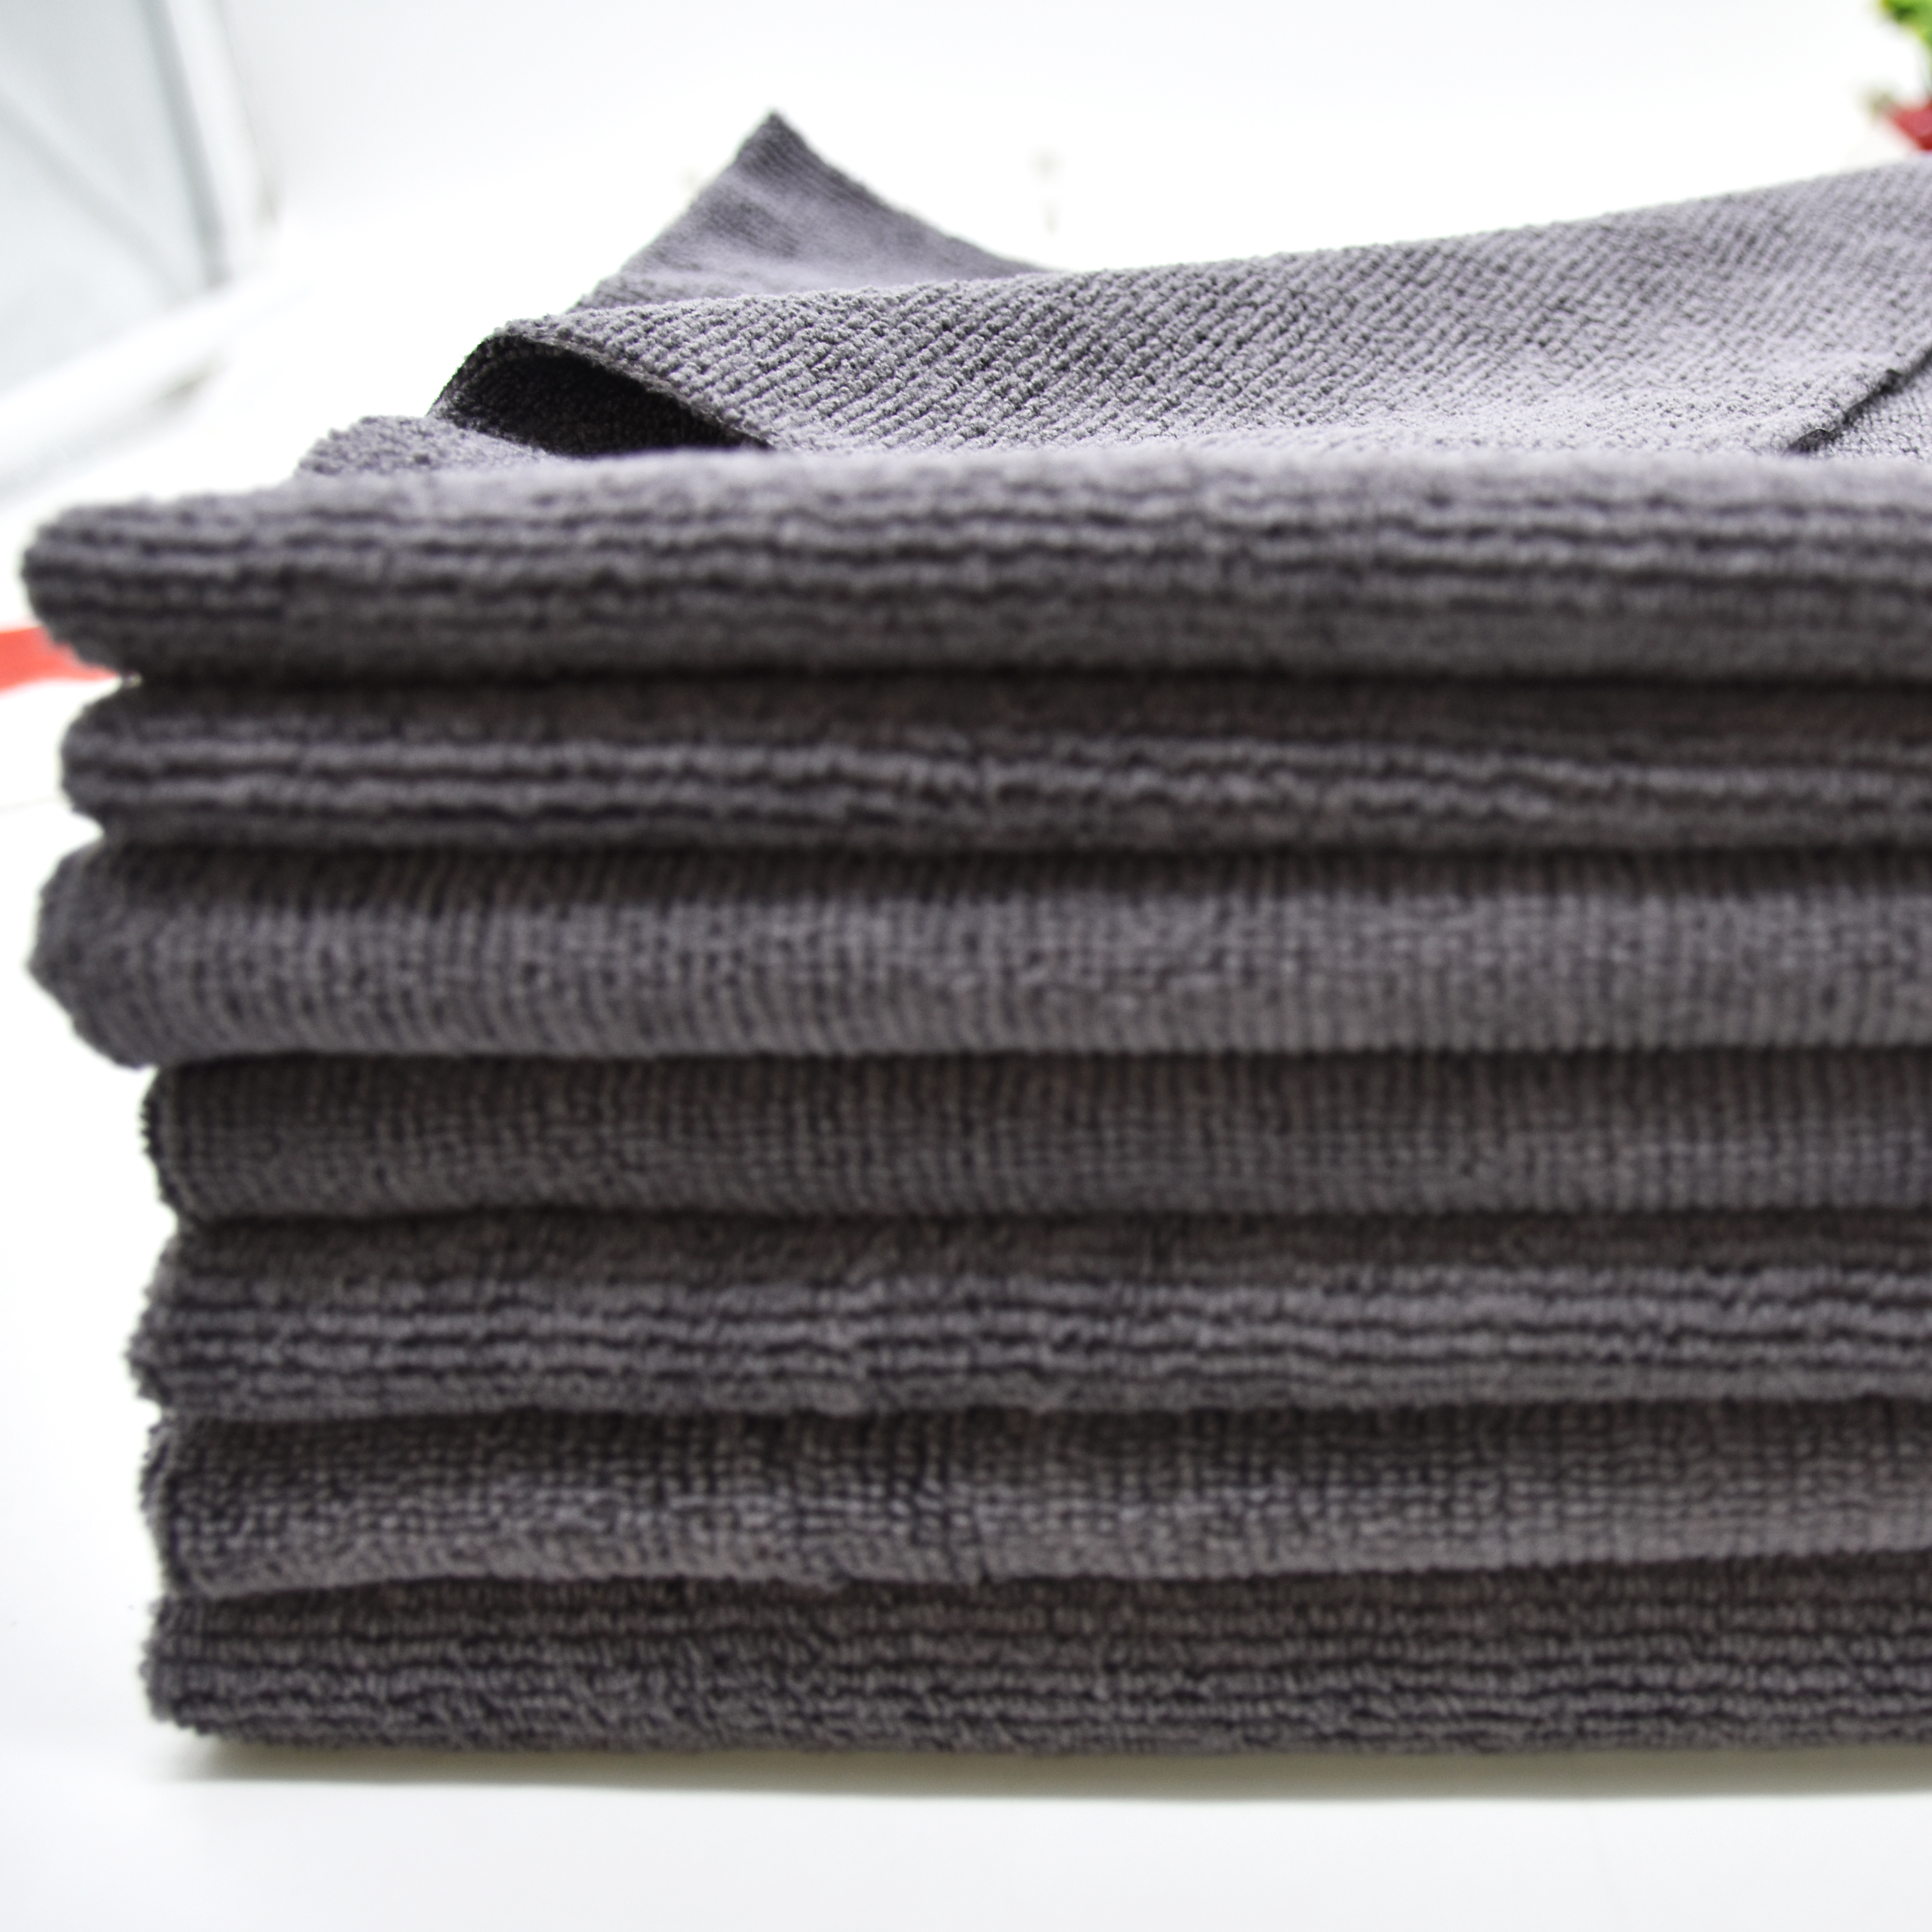 China direct manufacturer of microfiber edgeless all working towels Featured Image